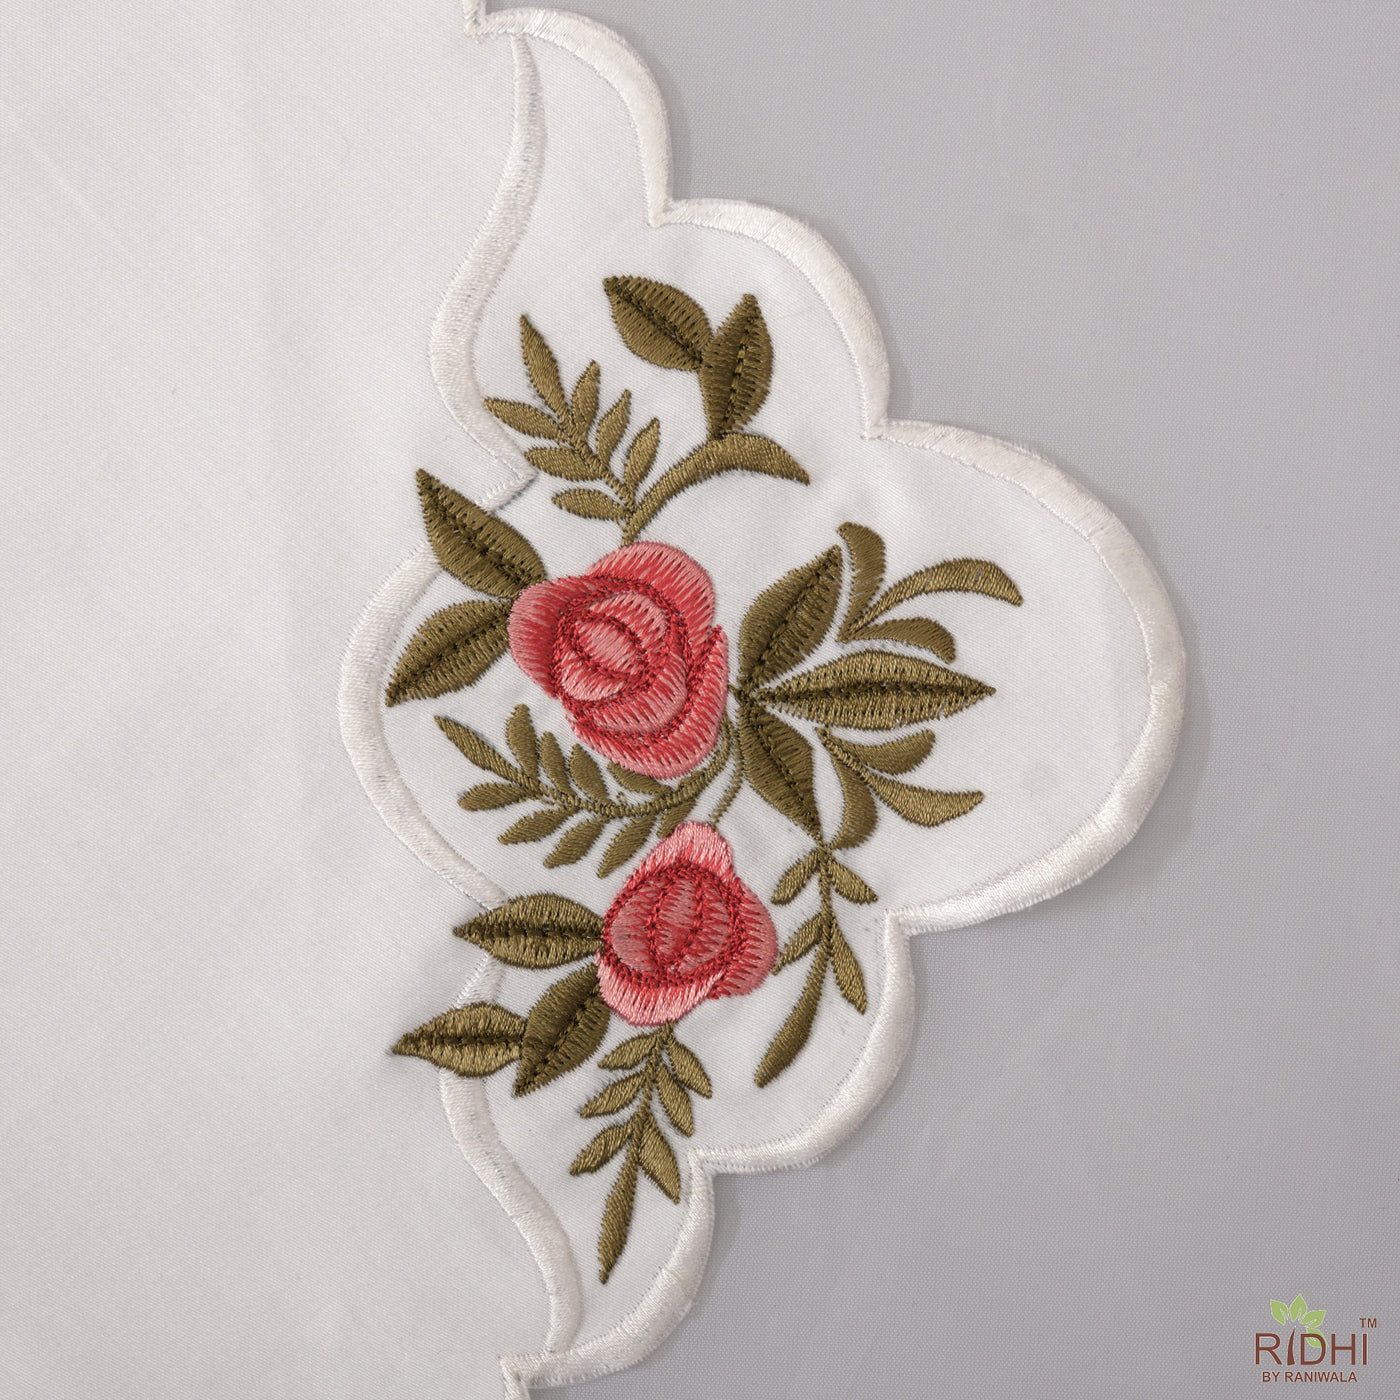 Fabricrush White Soft Cotton Cloth Roses Embroidered Napkins Set, Housewarming Home Wedding Party Farmhouse Events Gifts Mother's Day Gift Birthday